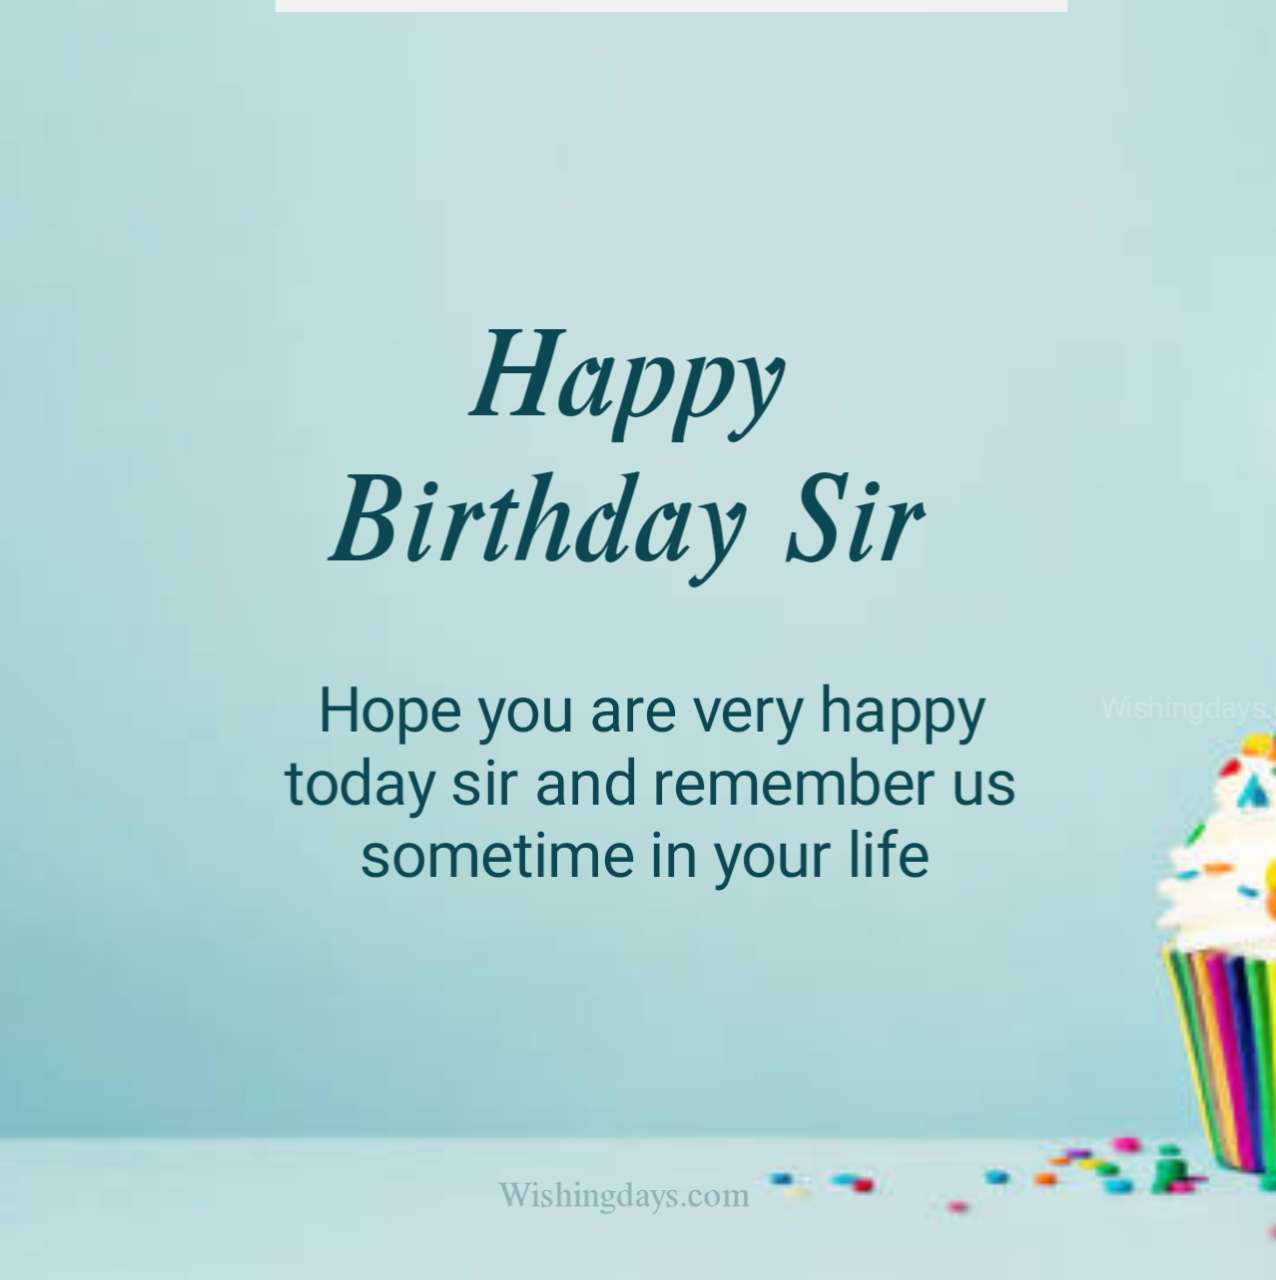 Happy Birthday Wishes For Sir Quotes Images & Messages - Wishing Days